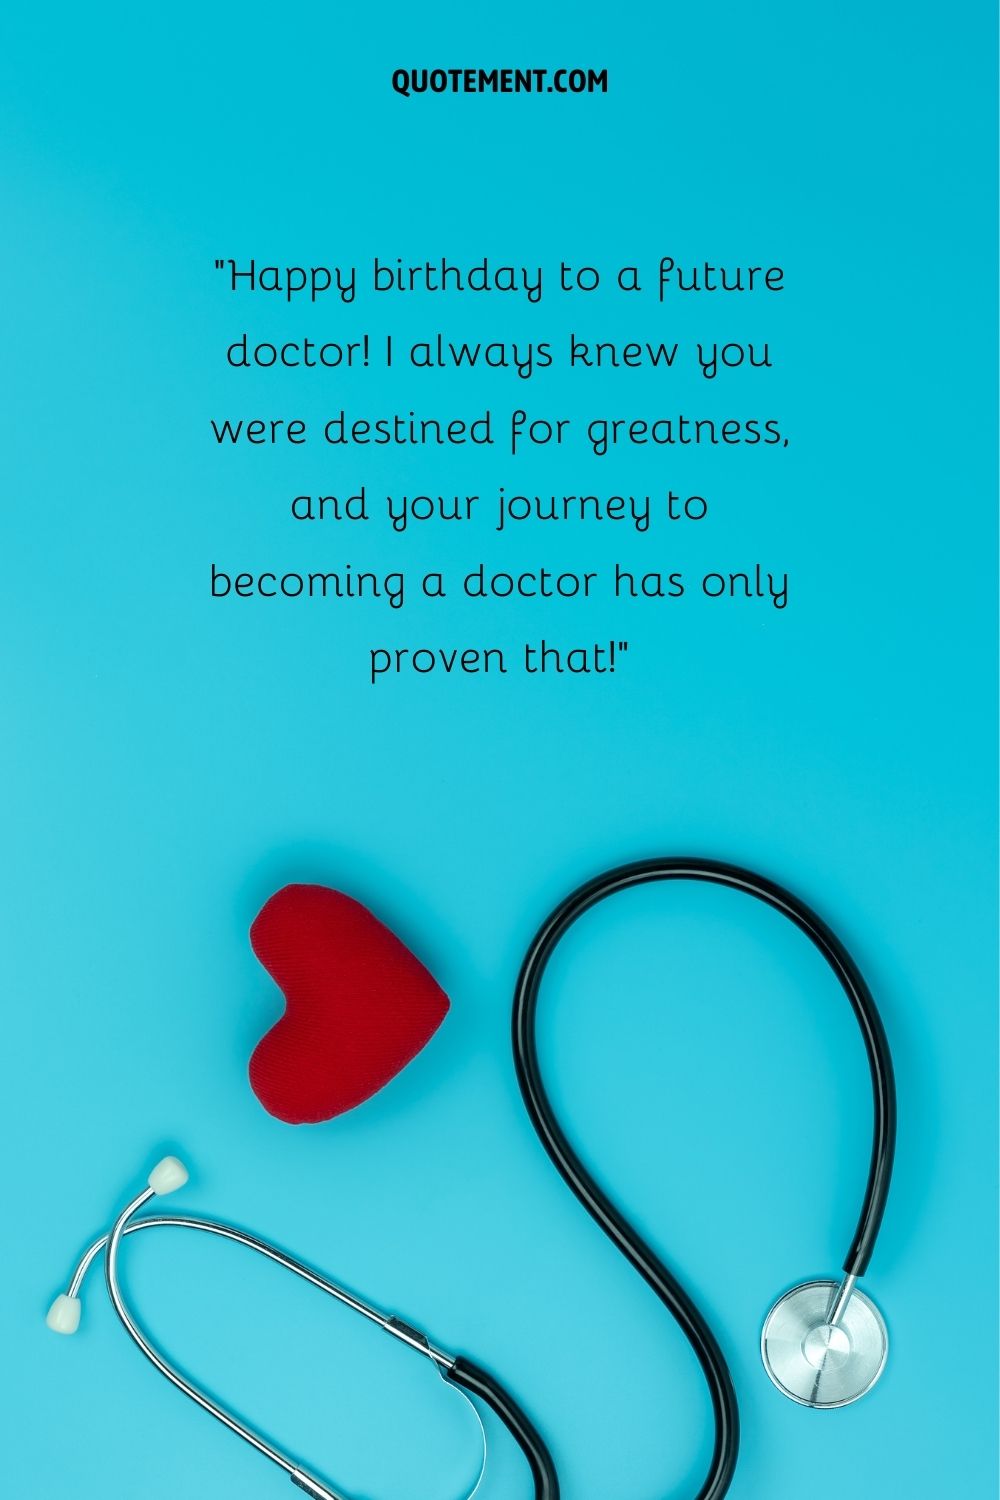 image of medical essentials representing birthday wishes for future doctor friend